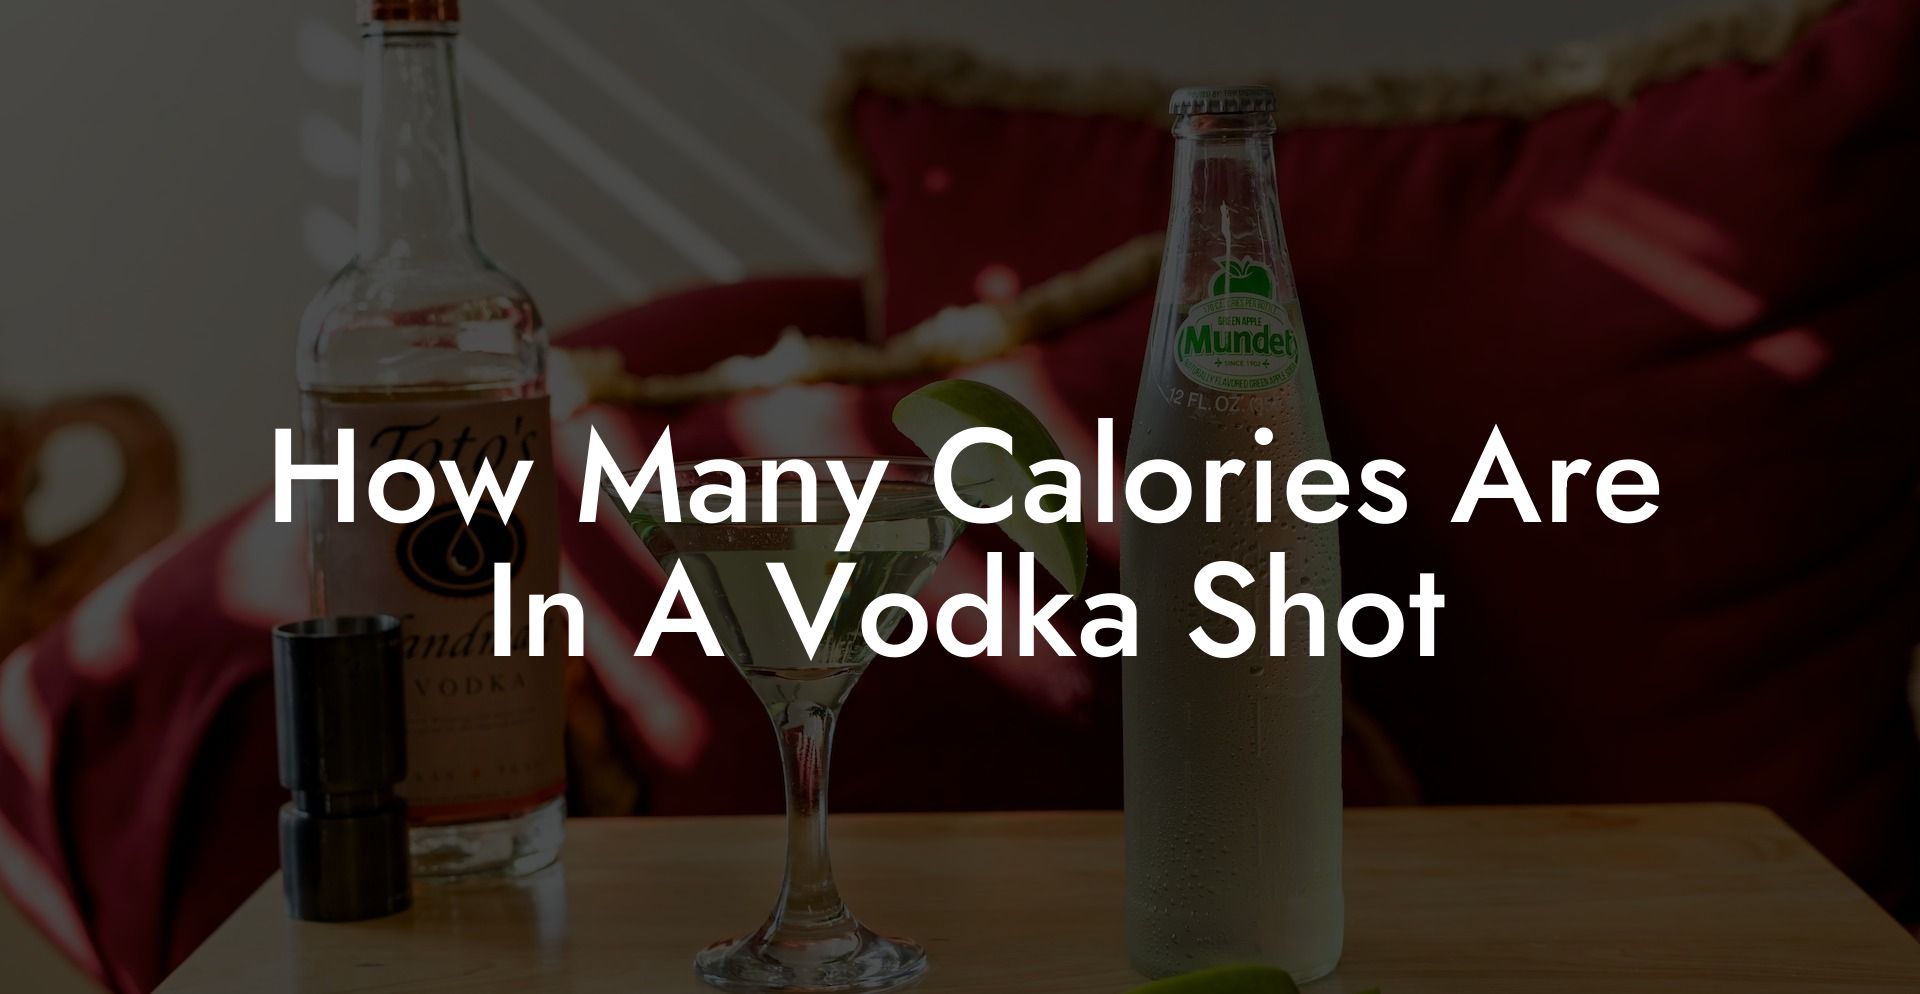 How Many Calories Are In A Vodka Shot